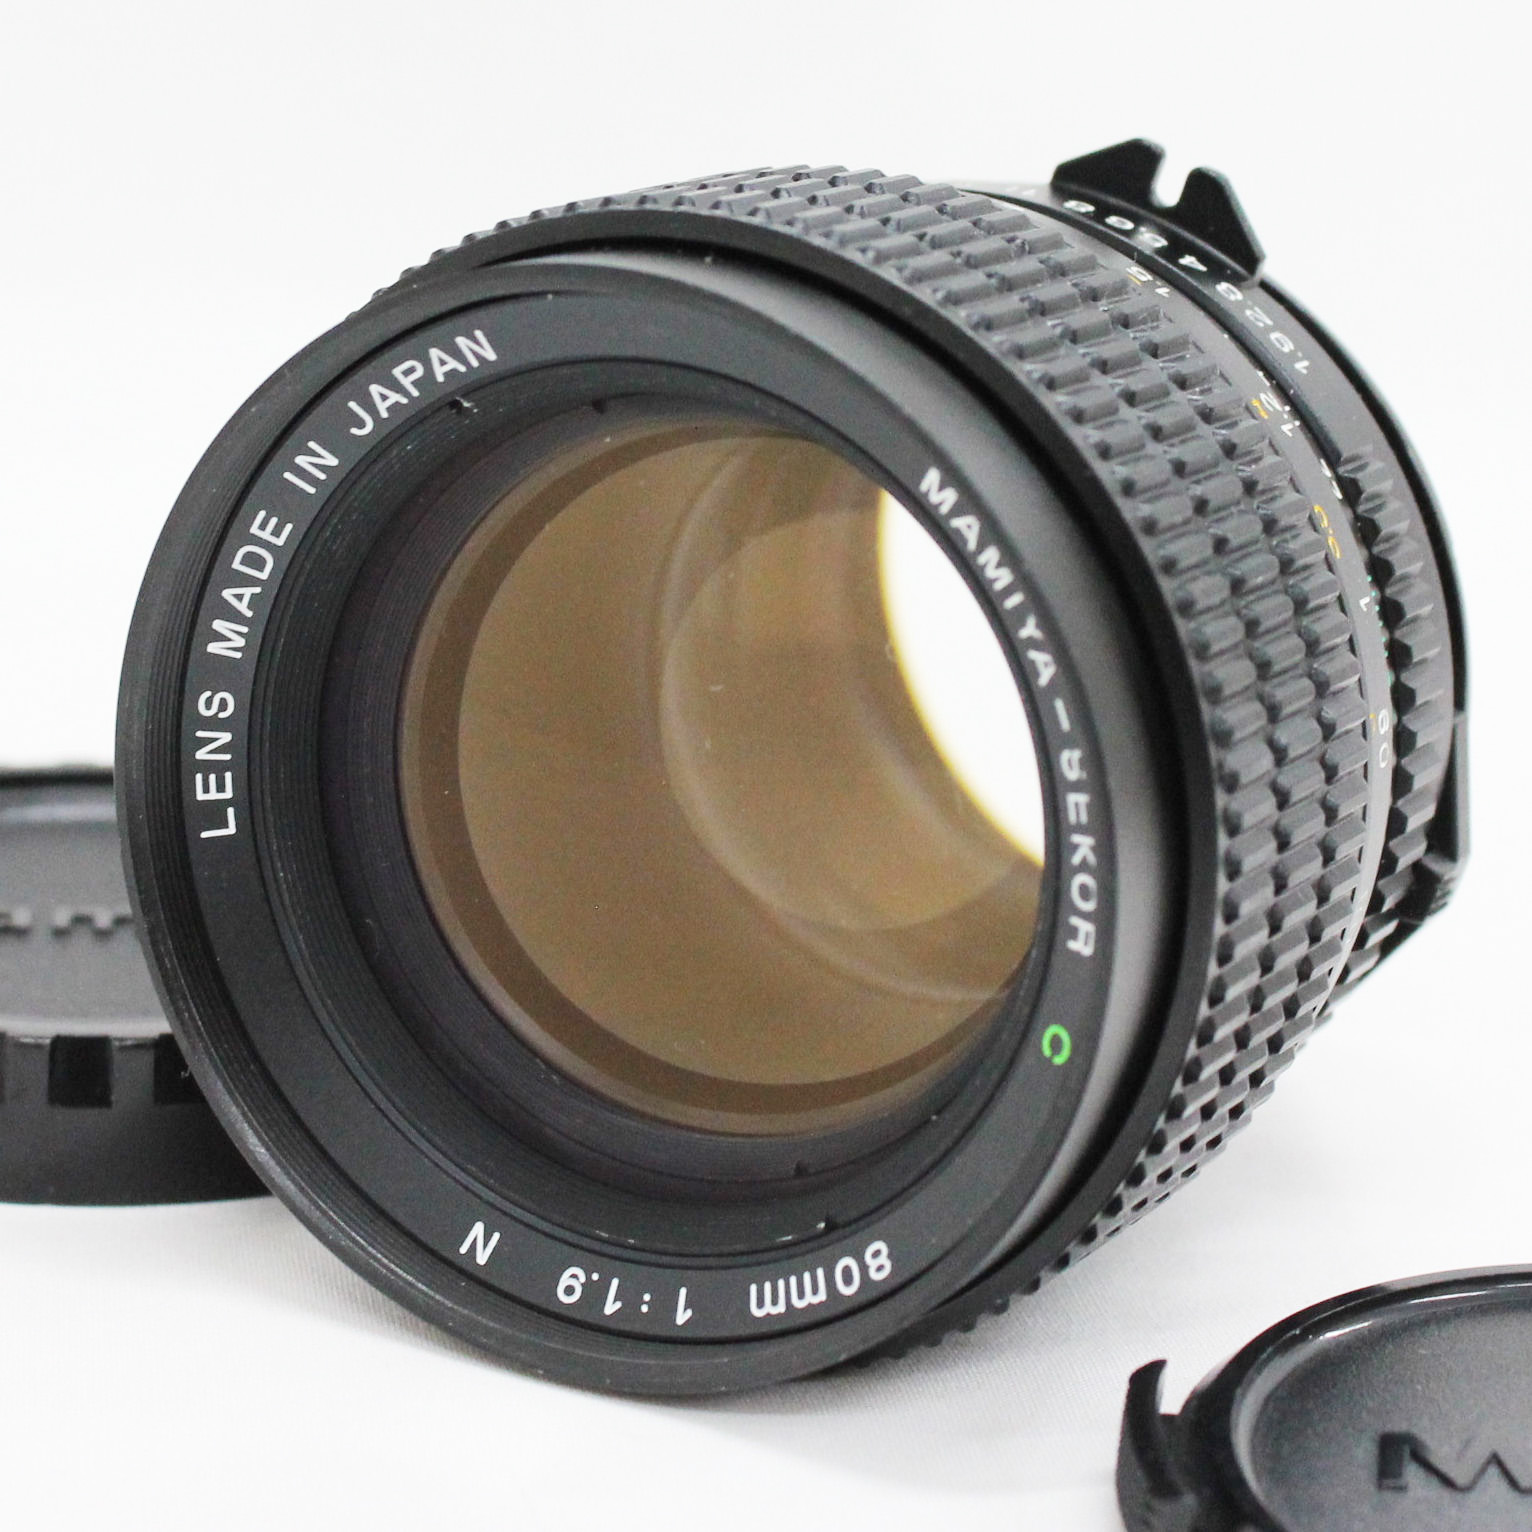 Mamiya-Sekor Macro C 80mm F/4 Lens for M645/Pro/TL/1000s from Japan